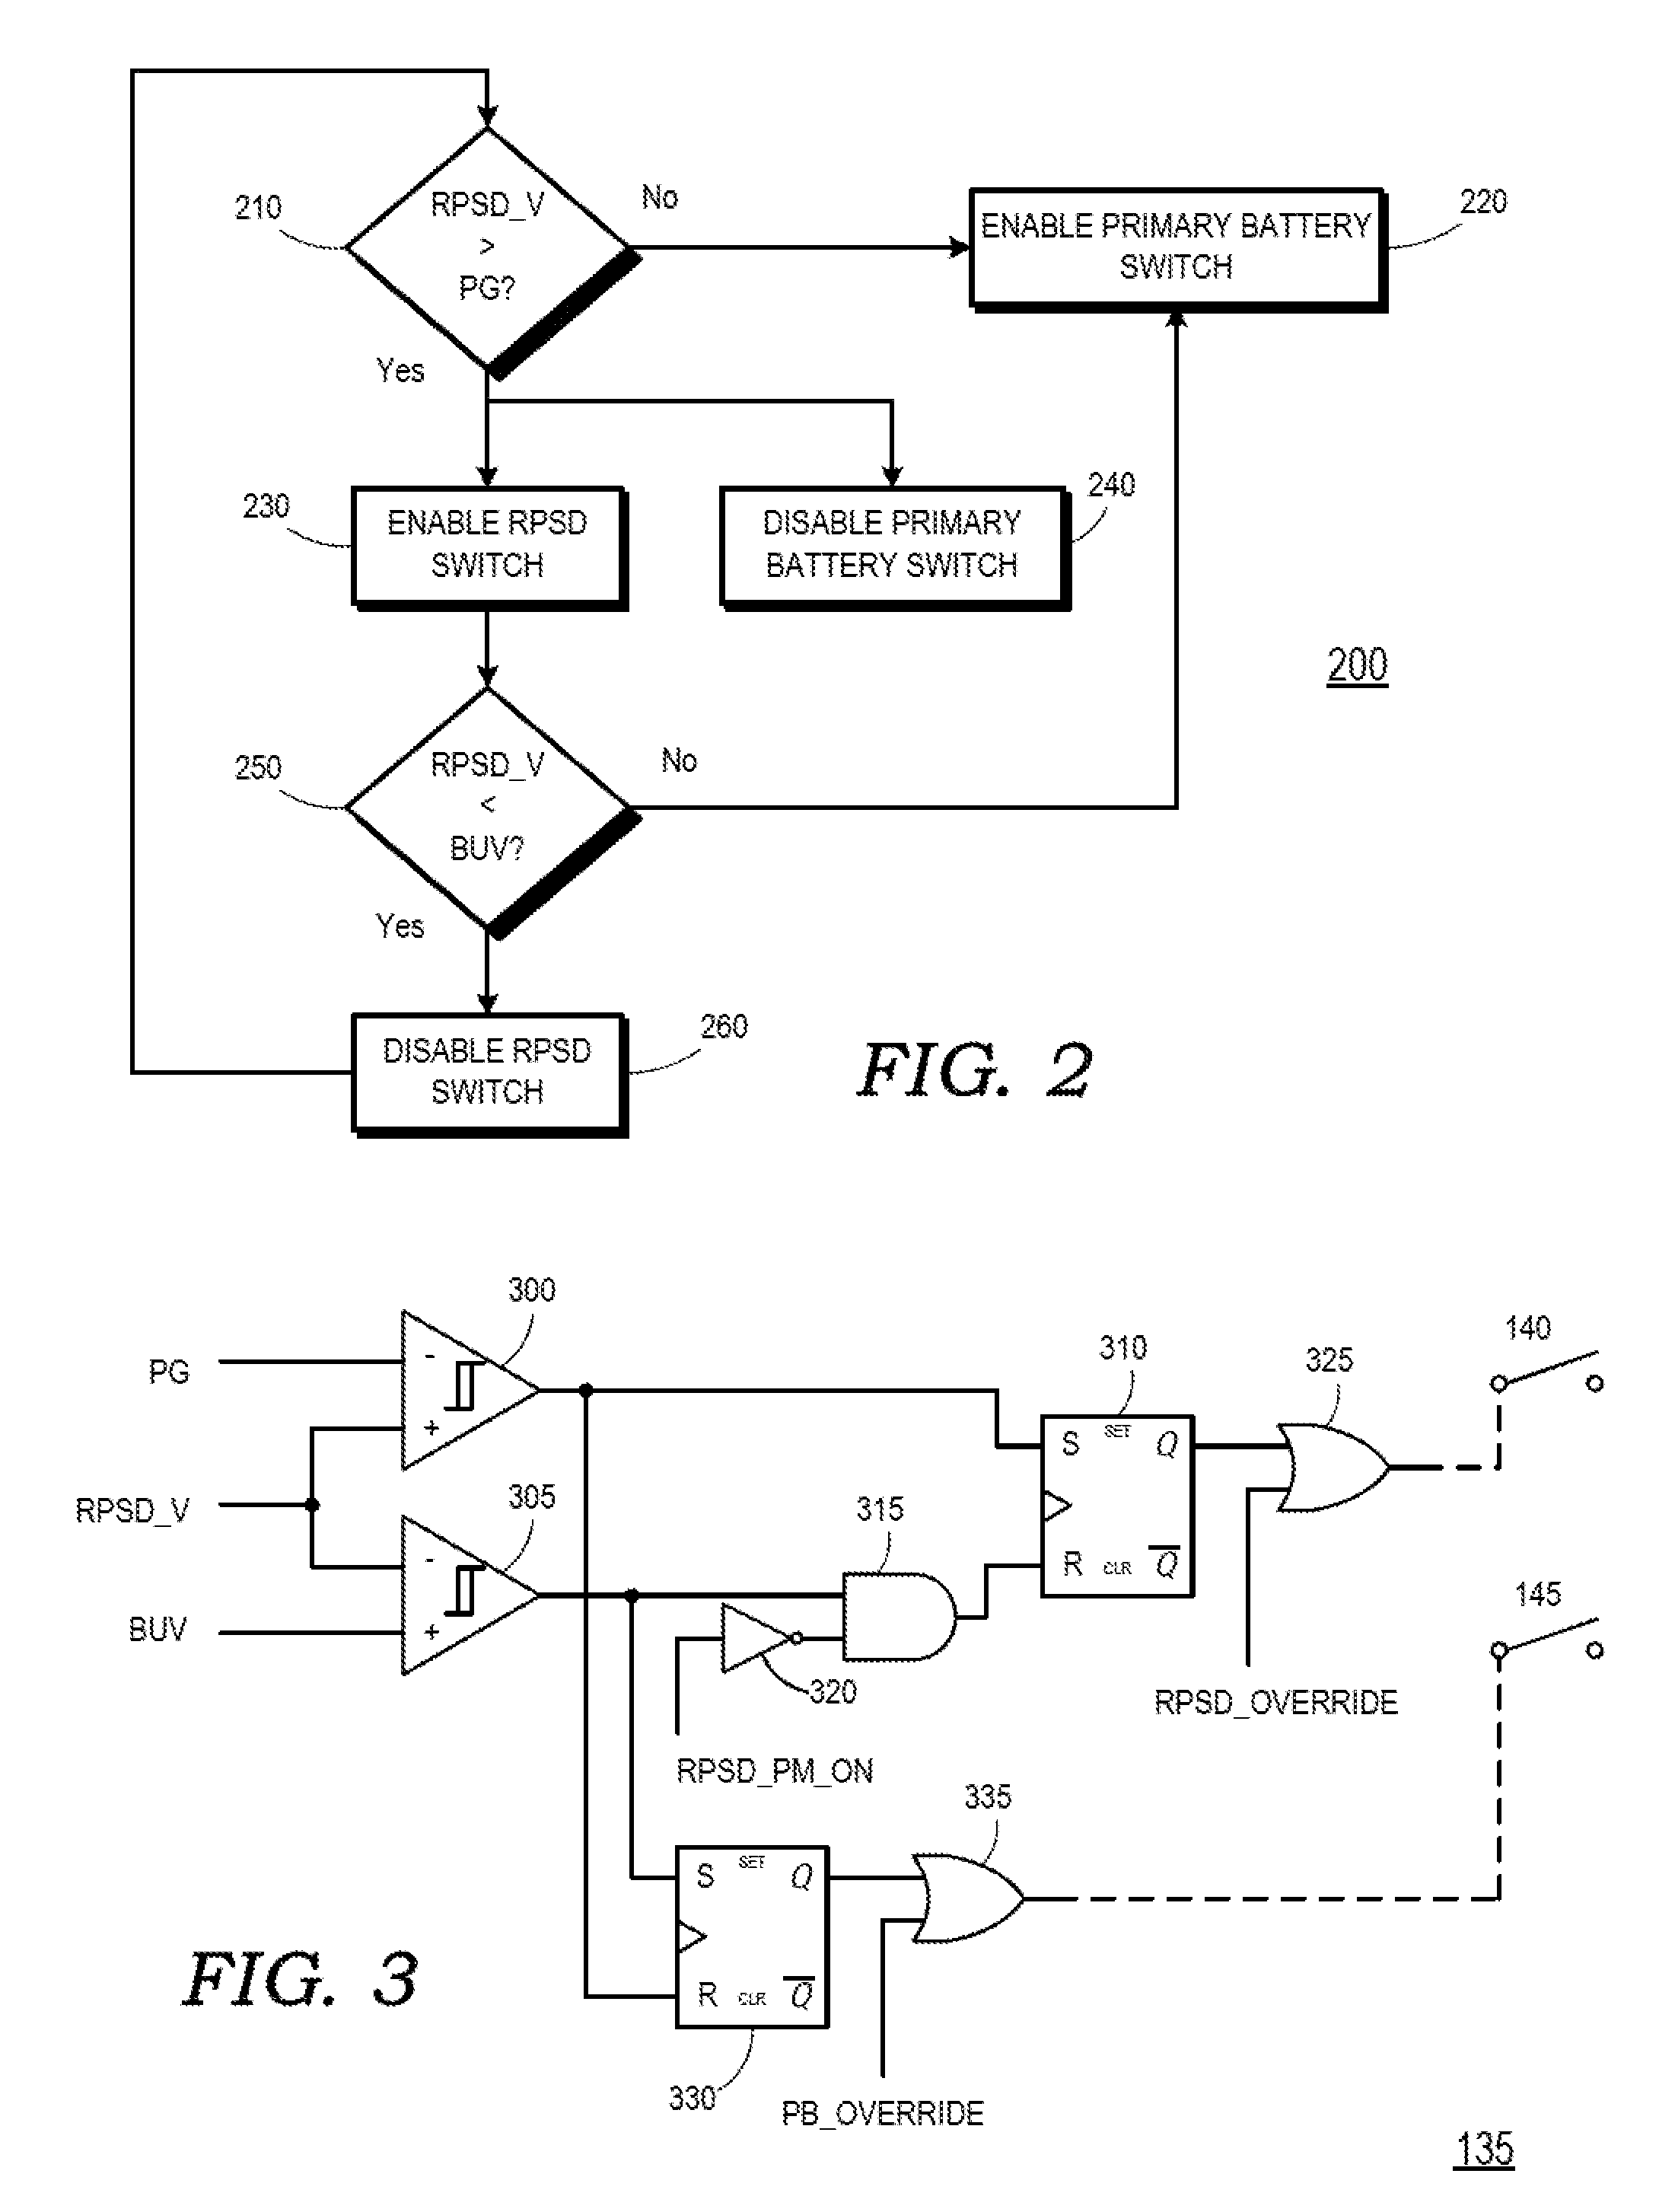 Voltage regulator with switching and low dropout modes